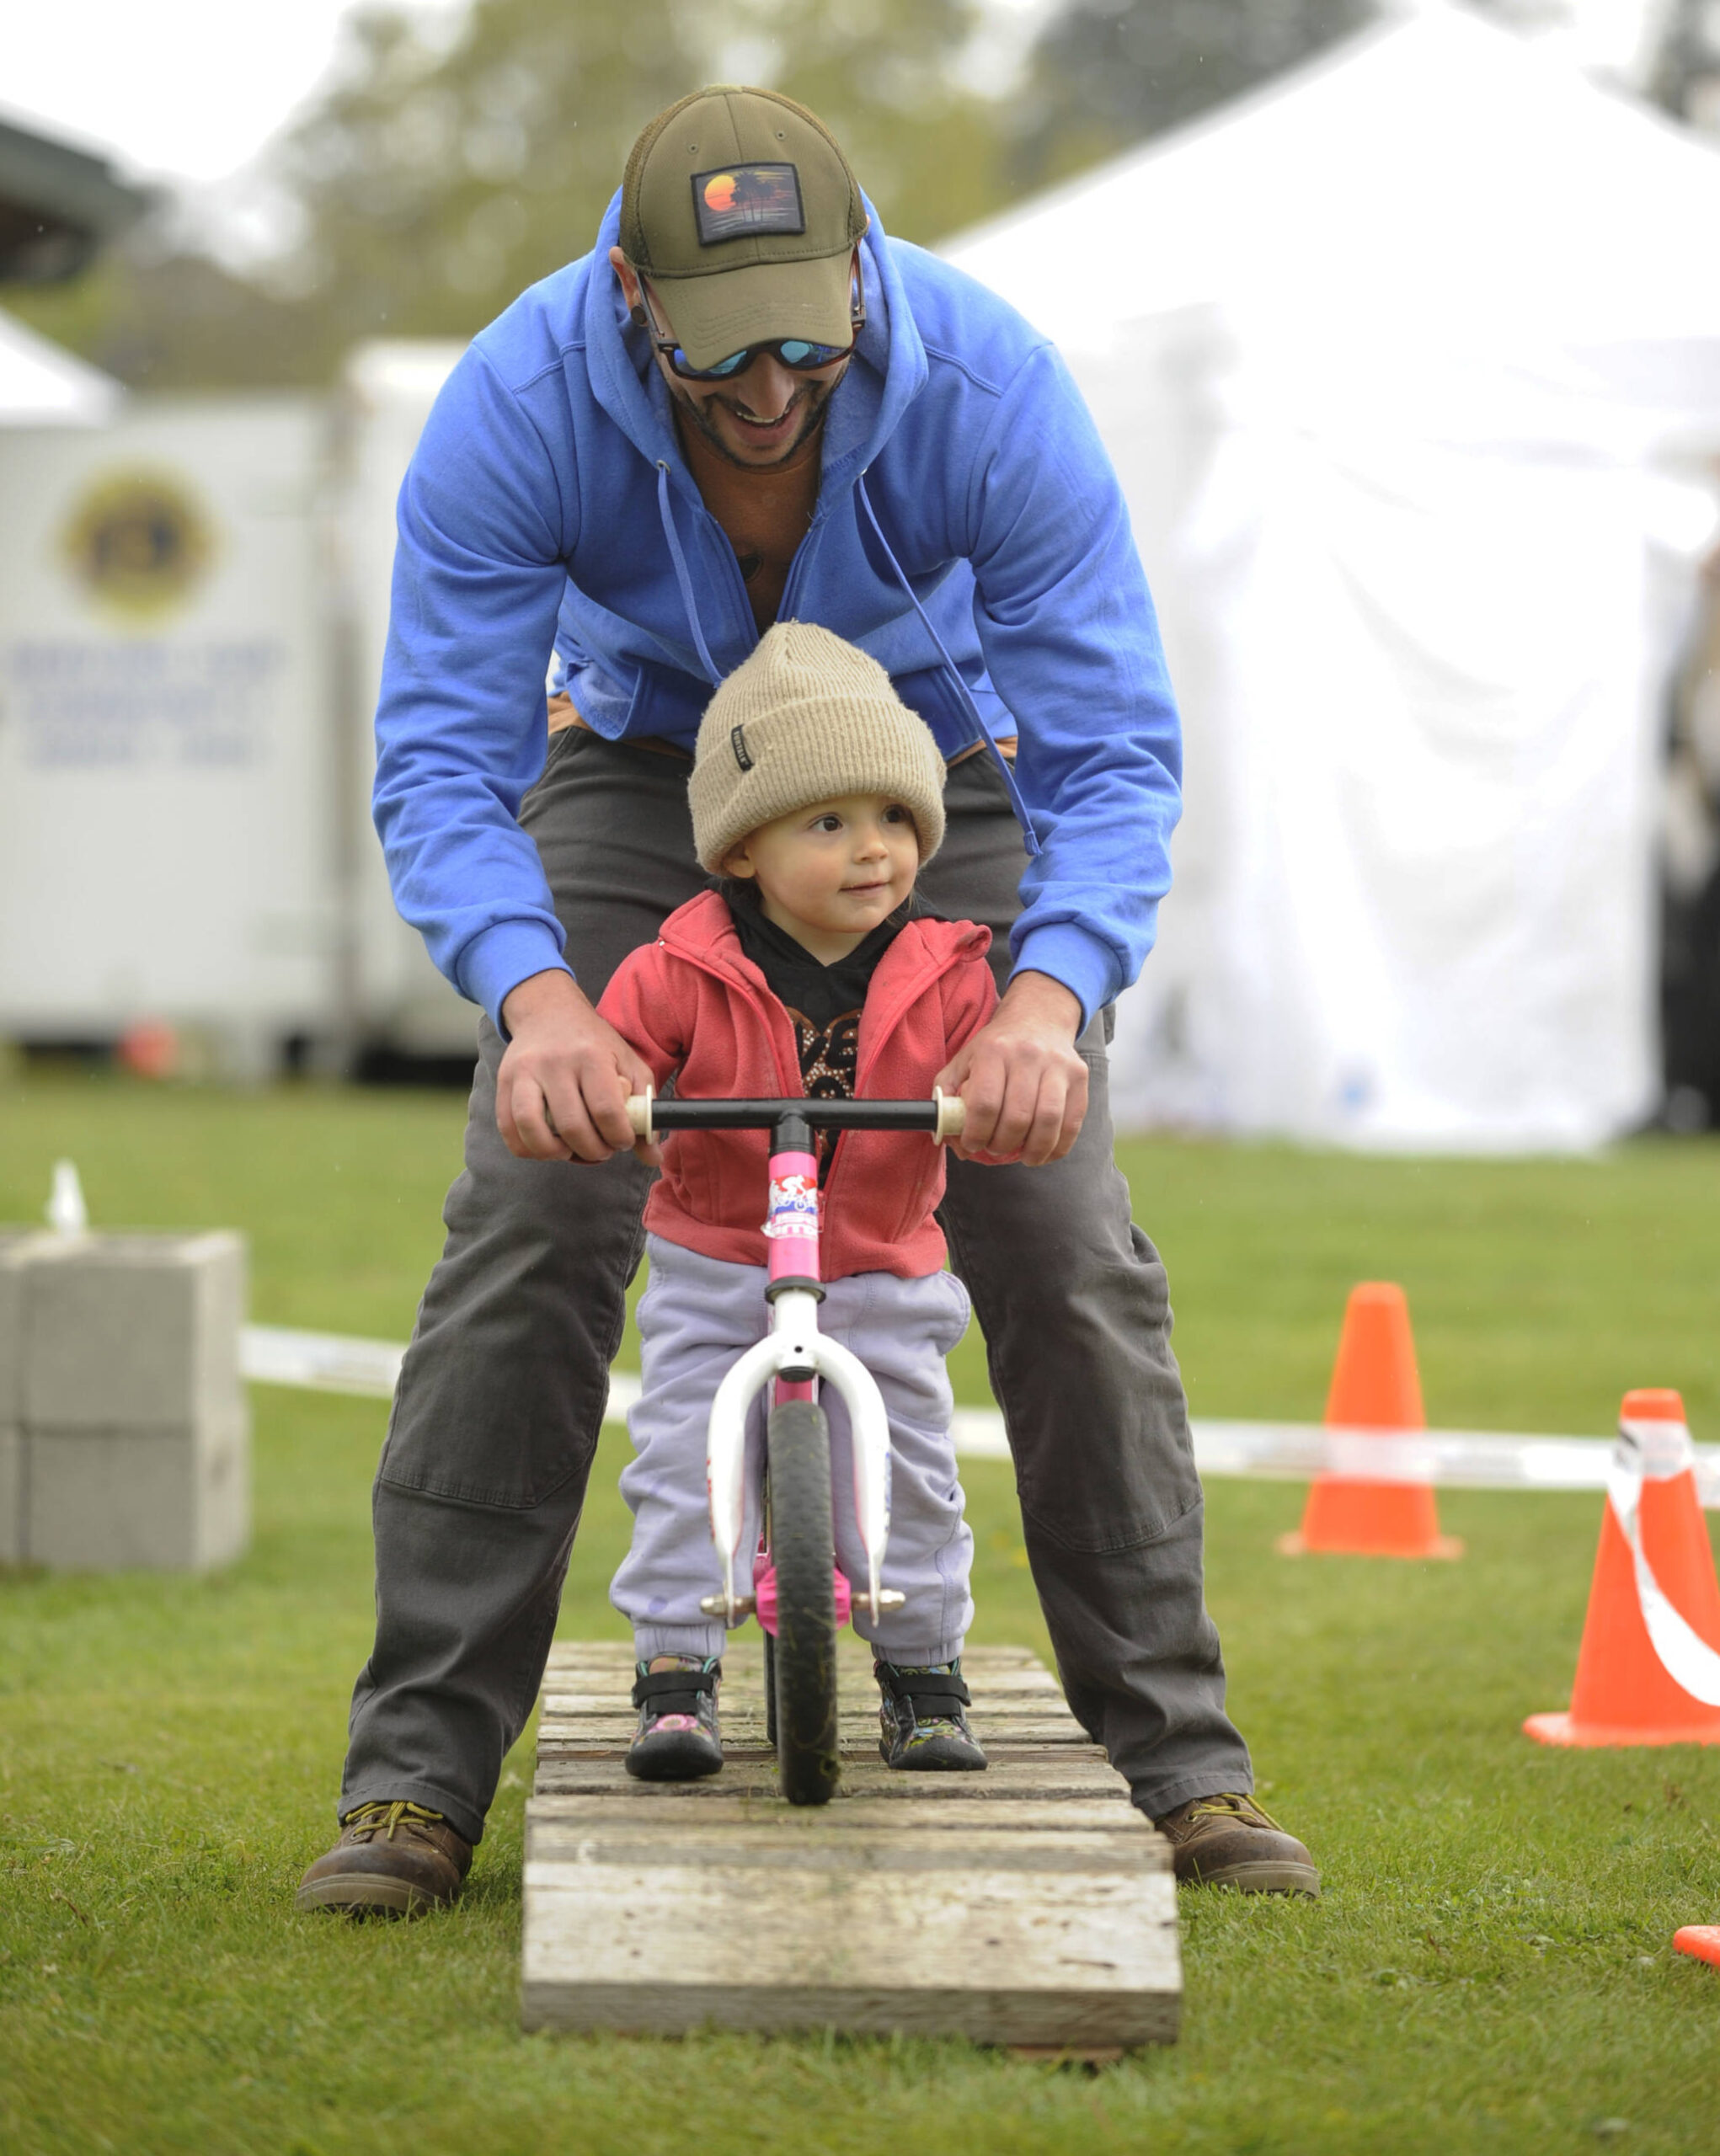 Sequim Gazette photo by Michael Dashiell / Luna Gondek, almost 2, of Sequim, is guided by John Gondek on a course set up by Lincoln Park BMX at the Family Fun Day event on May 6.